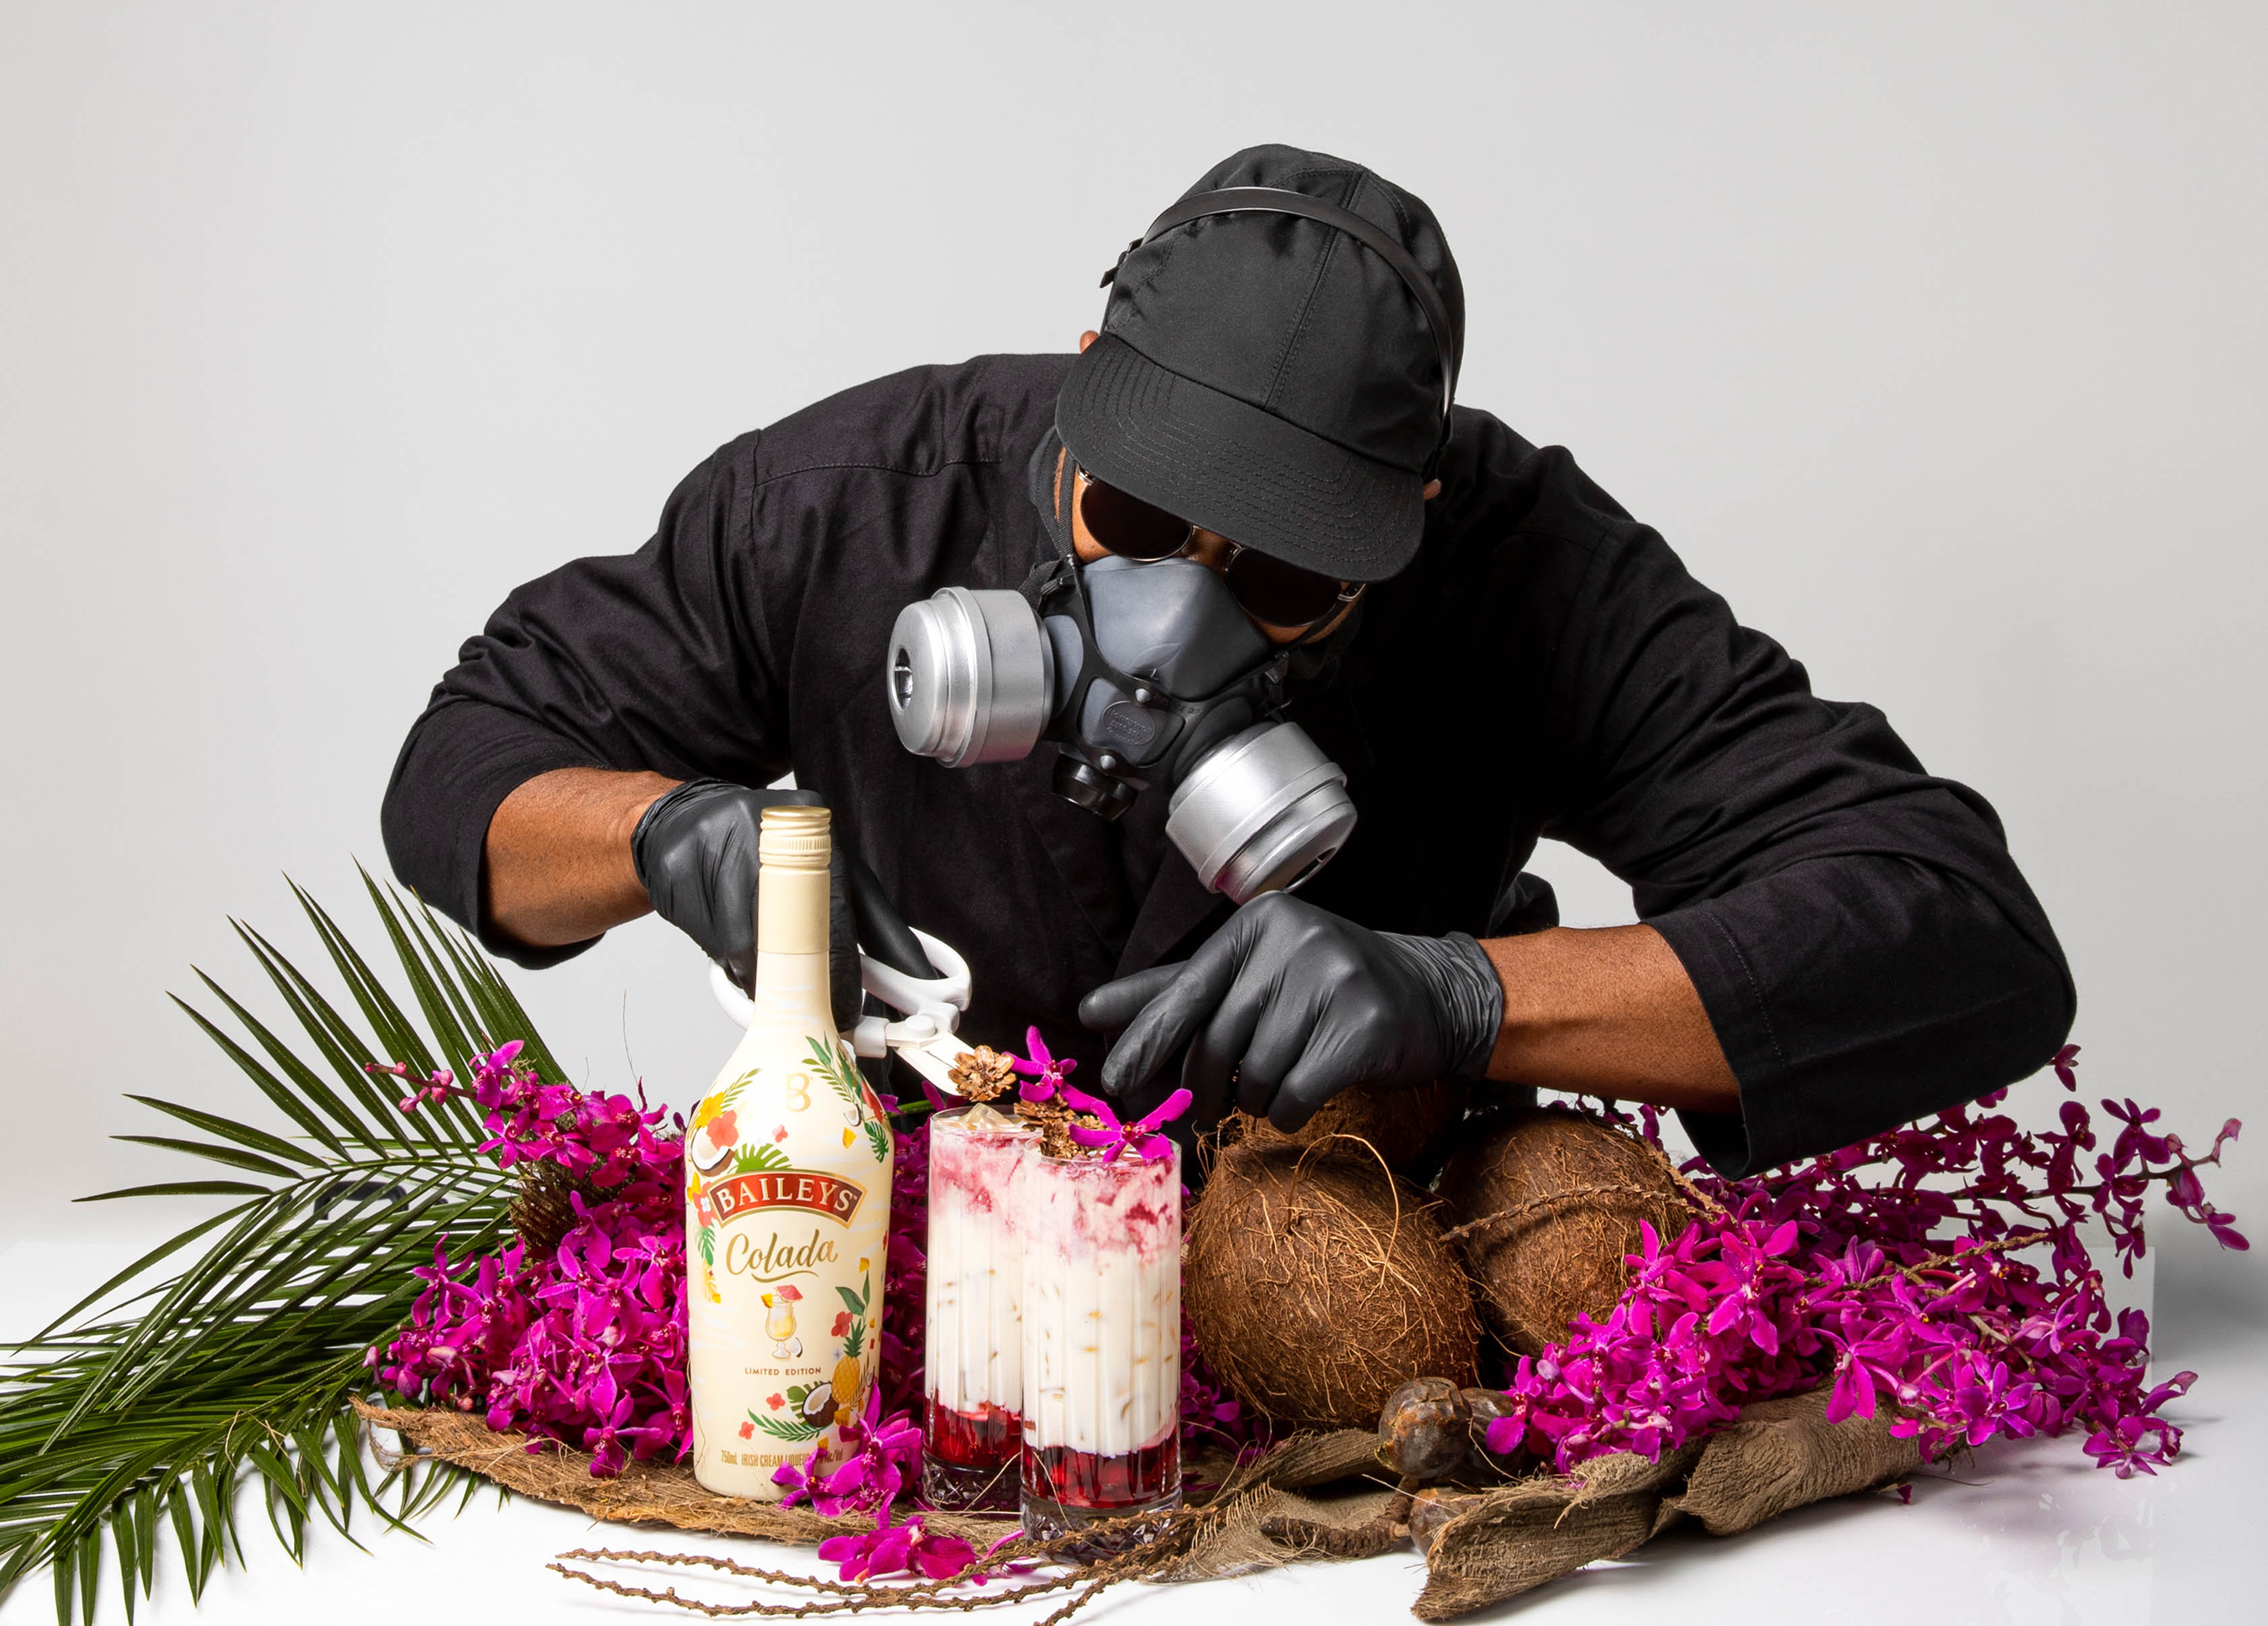 Mr. Flower Fantastic pairs the Coquito Colada with a coconut and orchid floral garnish